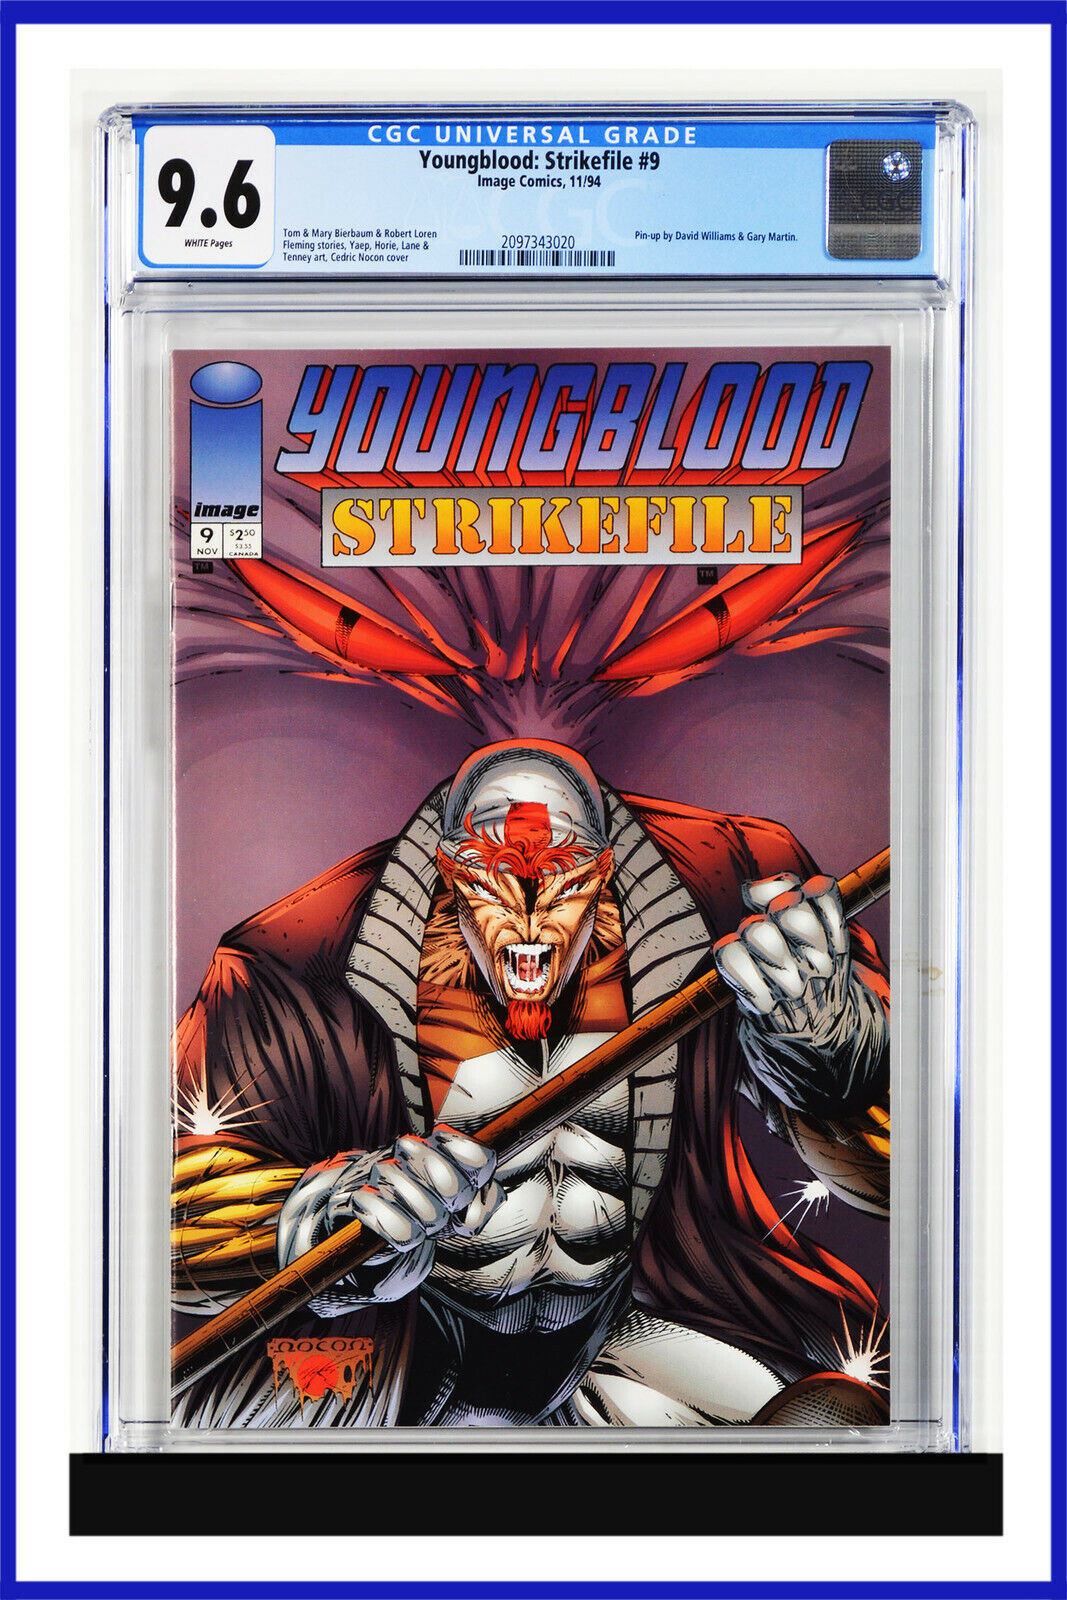 Youngblood Strike File #9 CGC Graded 9.6 Image November 1994 Comic Book.